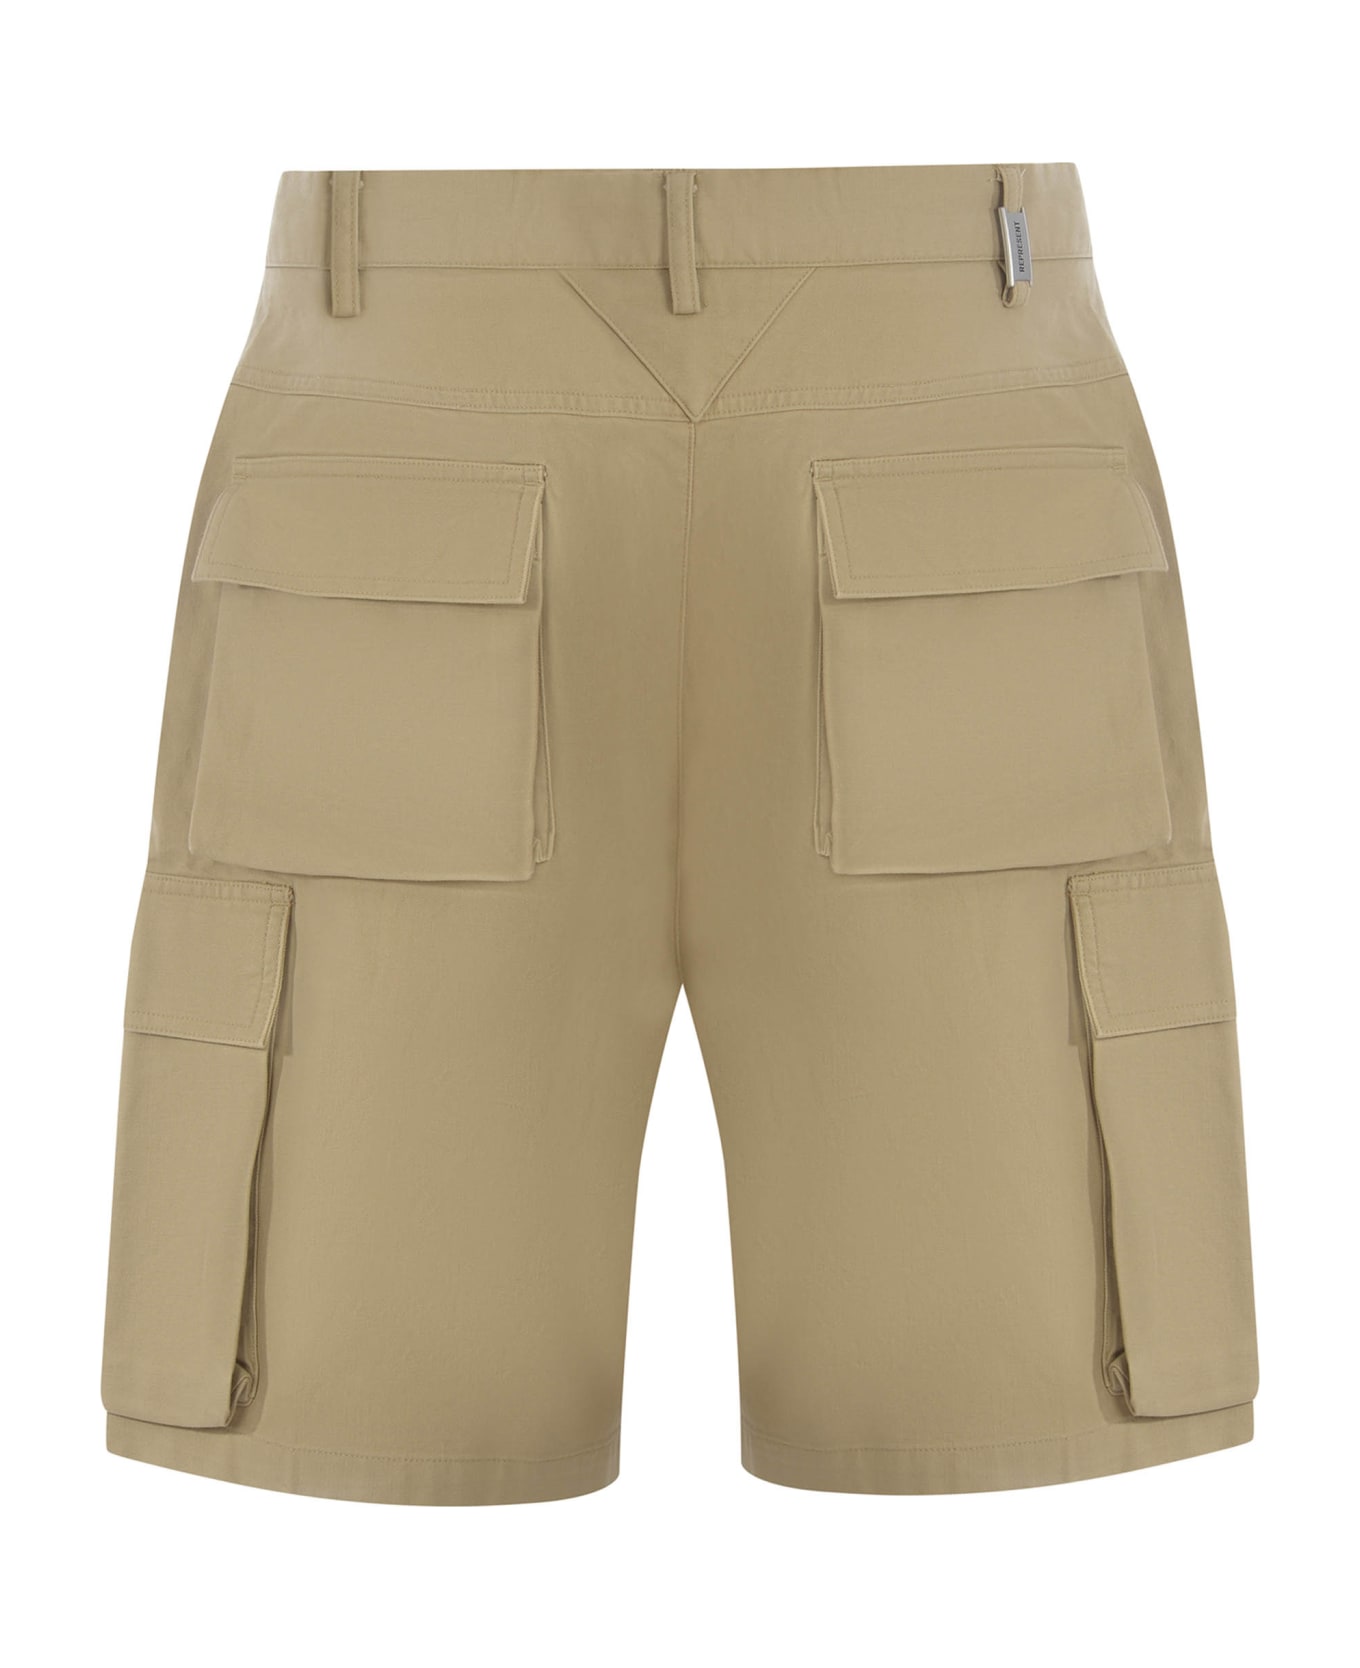 REPRESENT Shorts Represent Made Of Cotton - Beige